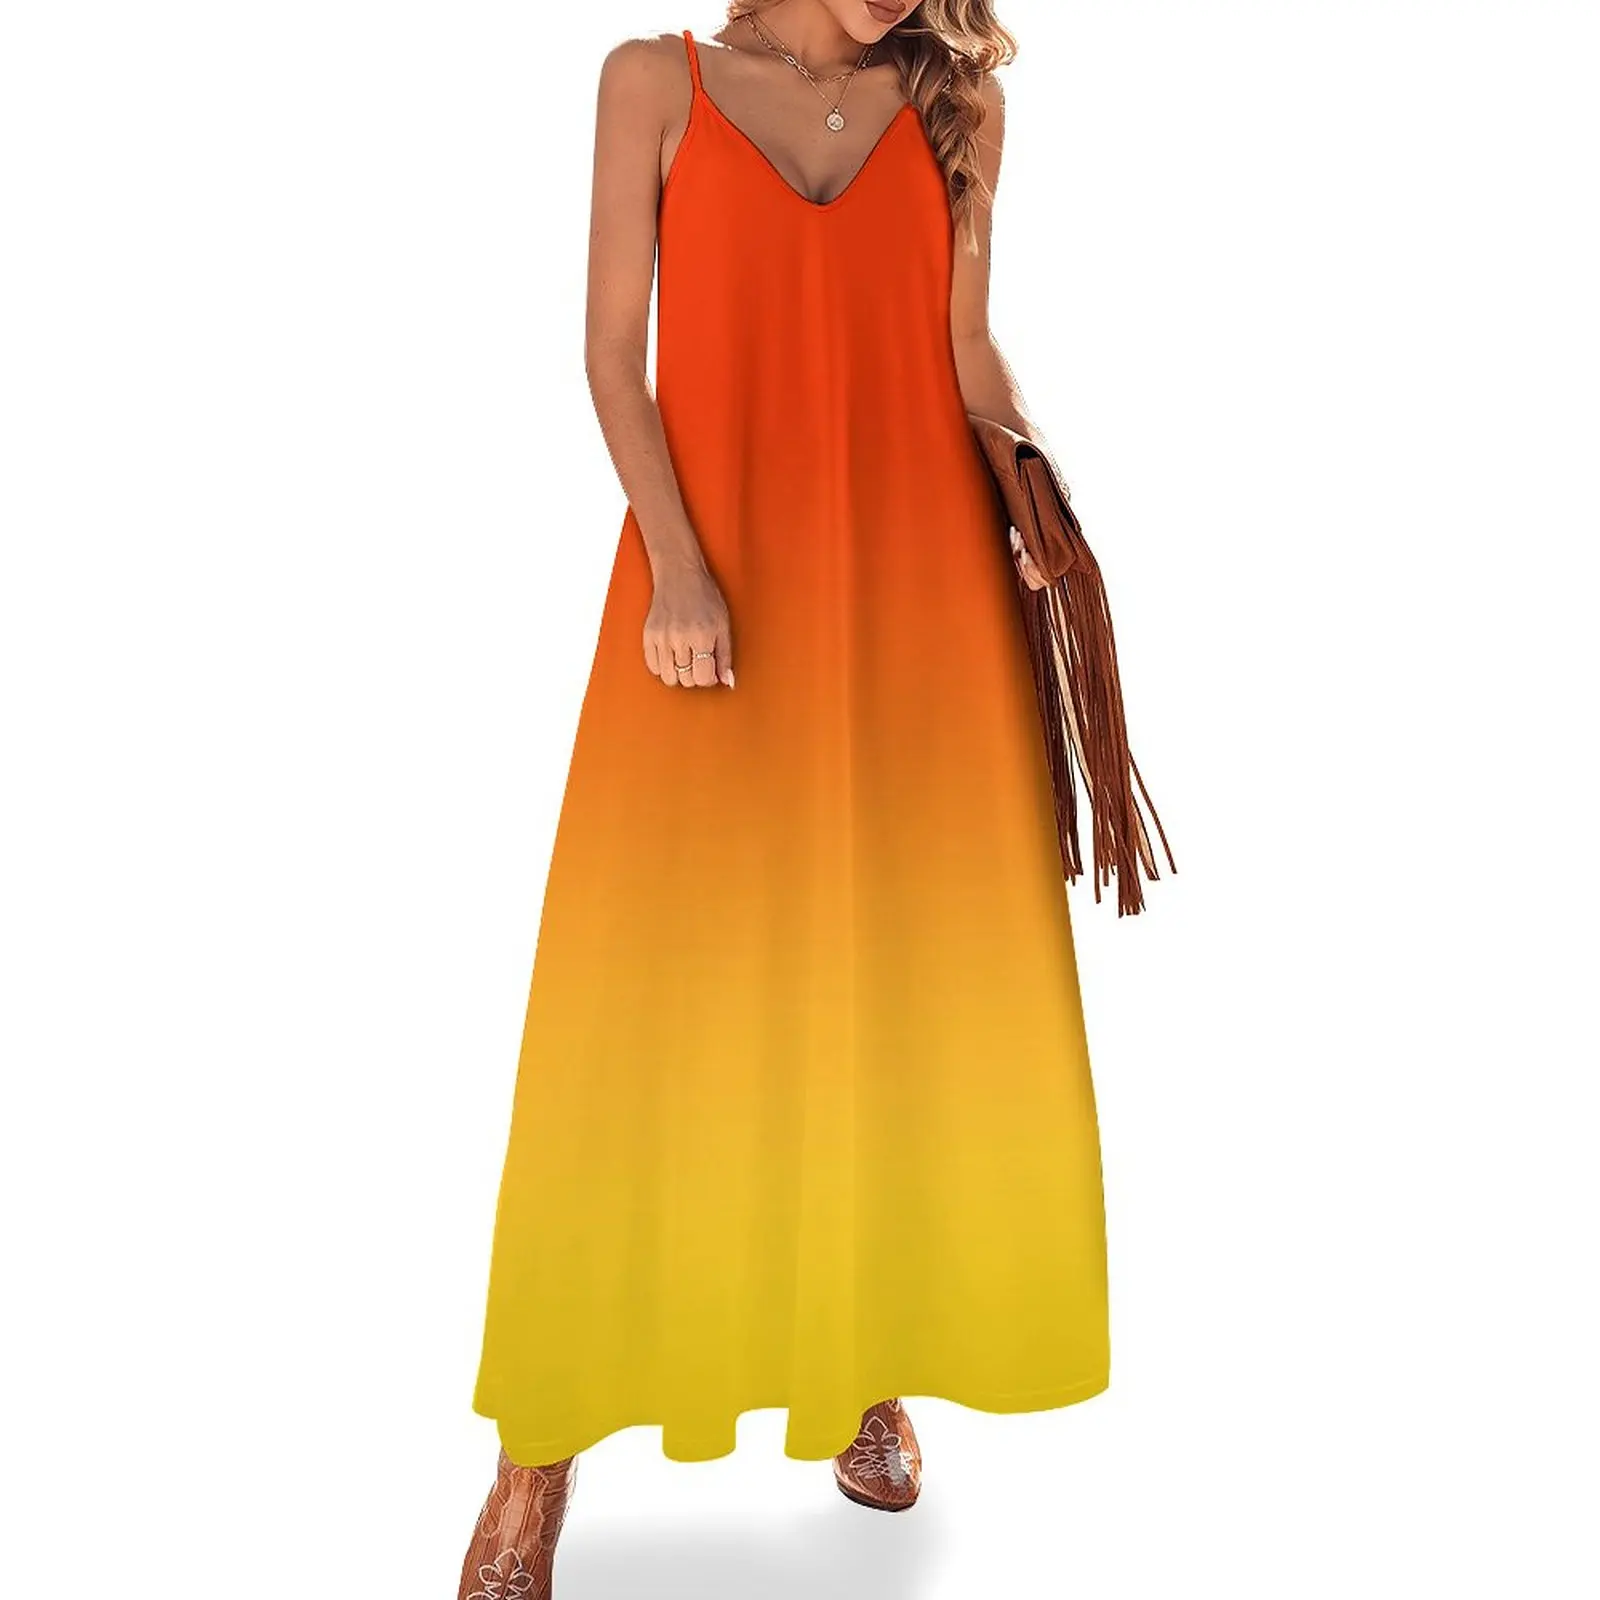 

OMBRE GRADIENT ORANGE RED AND YELLOW ONE OF 100 CHIC OMBRE 2 TONE DESIGNS ON OZCUSHIONS Sleeveless Dress women clothes